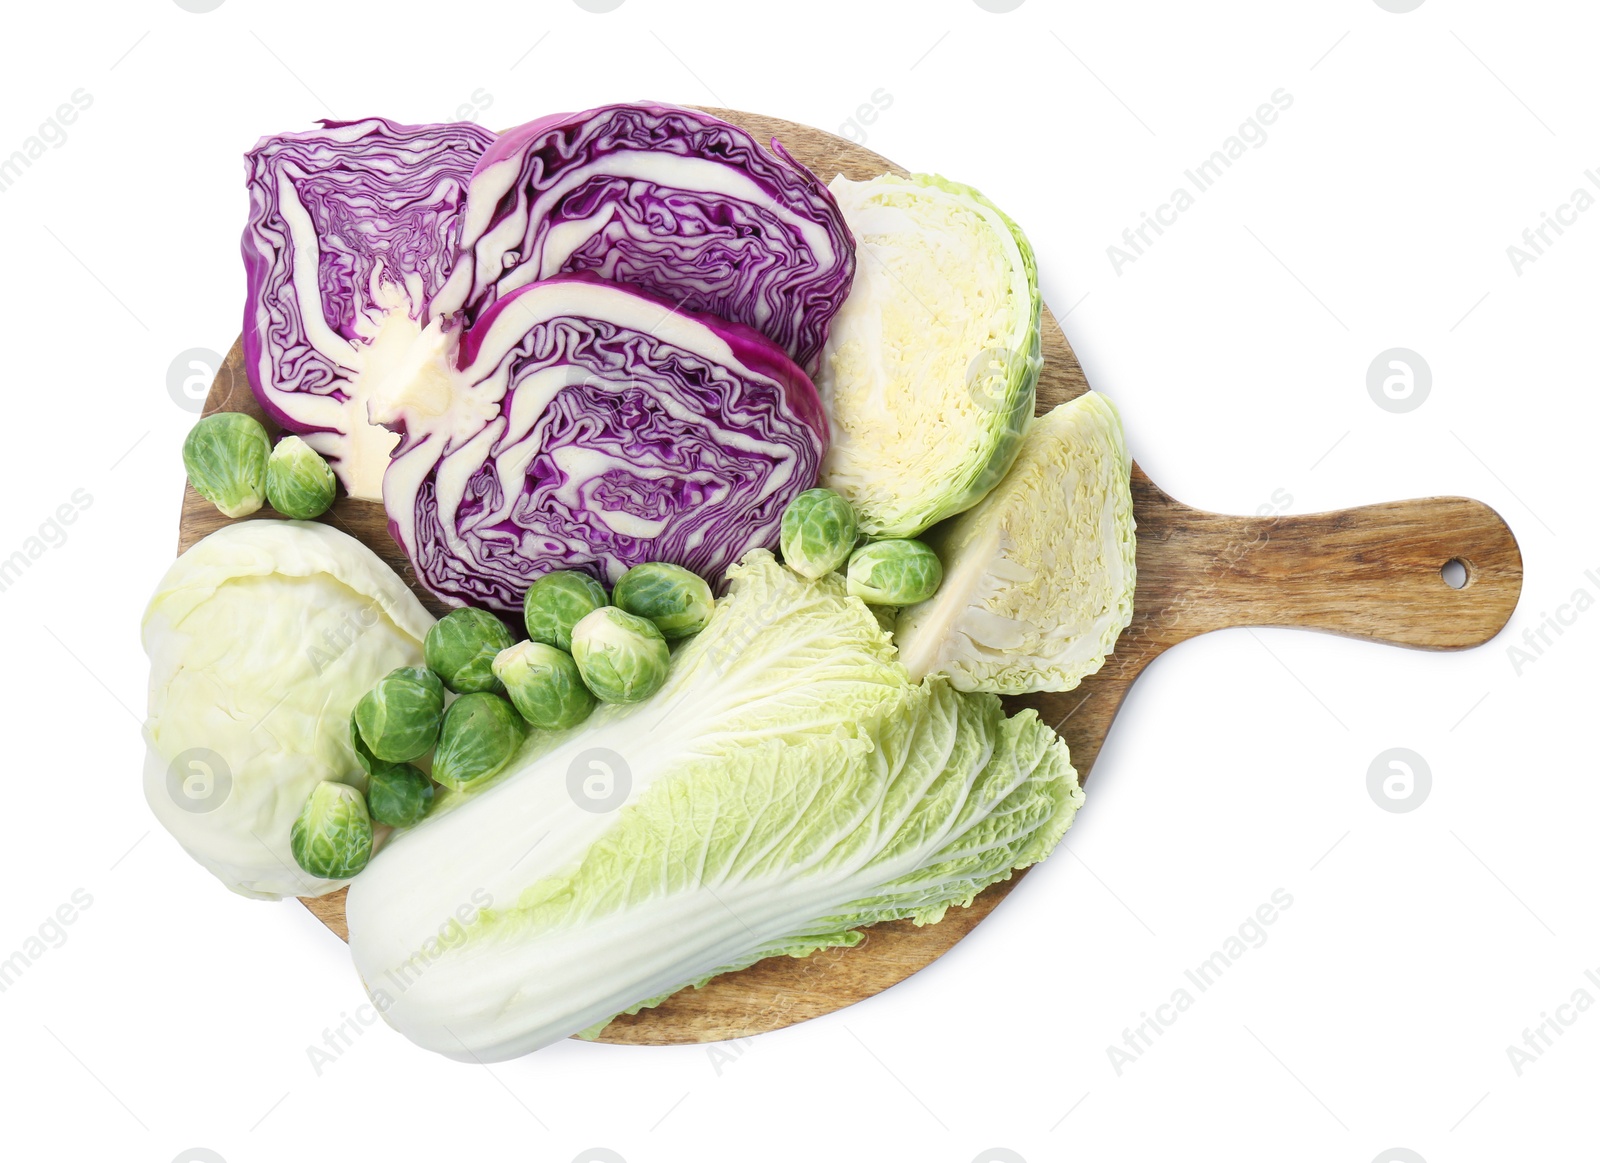 Photo of Wooden board with different types of cabbage isolated on white, top view